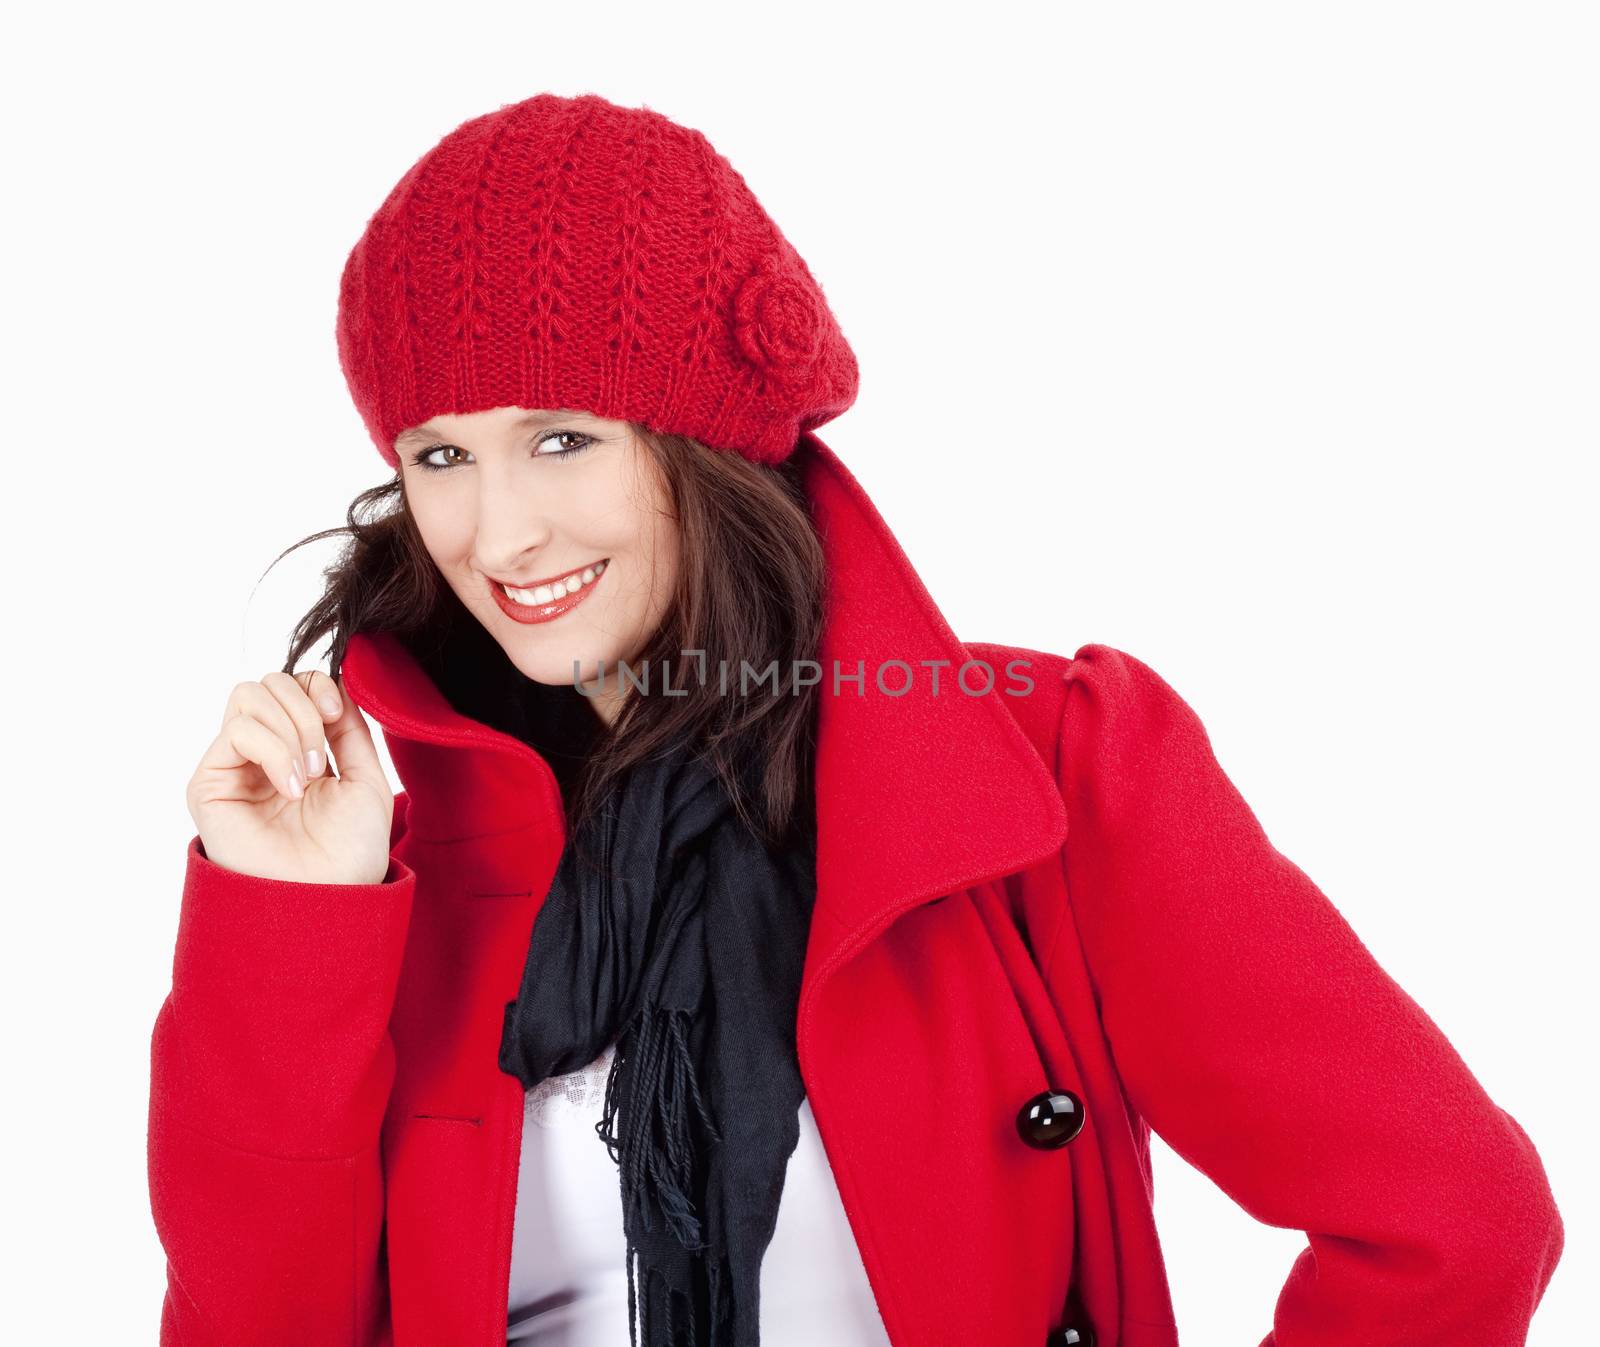 Young Woman in Red Coat and Cap Smiling - Isolated on White